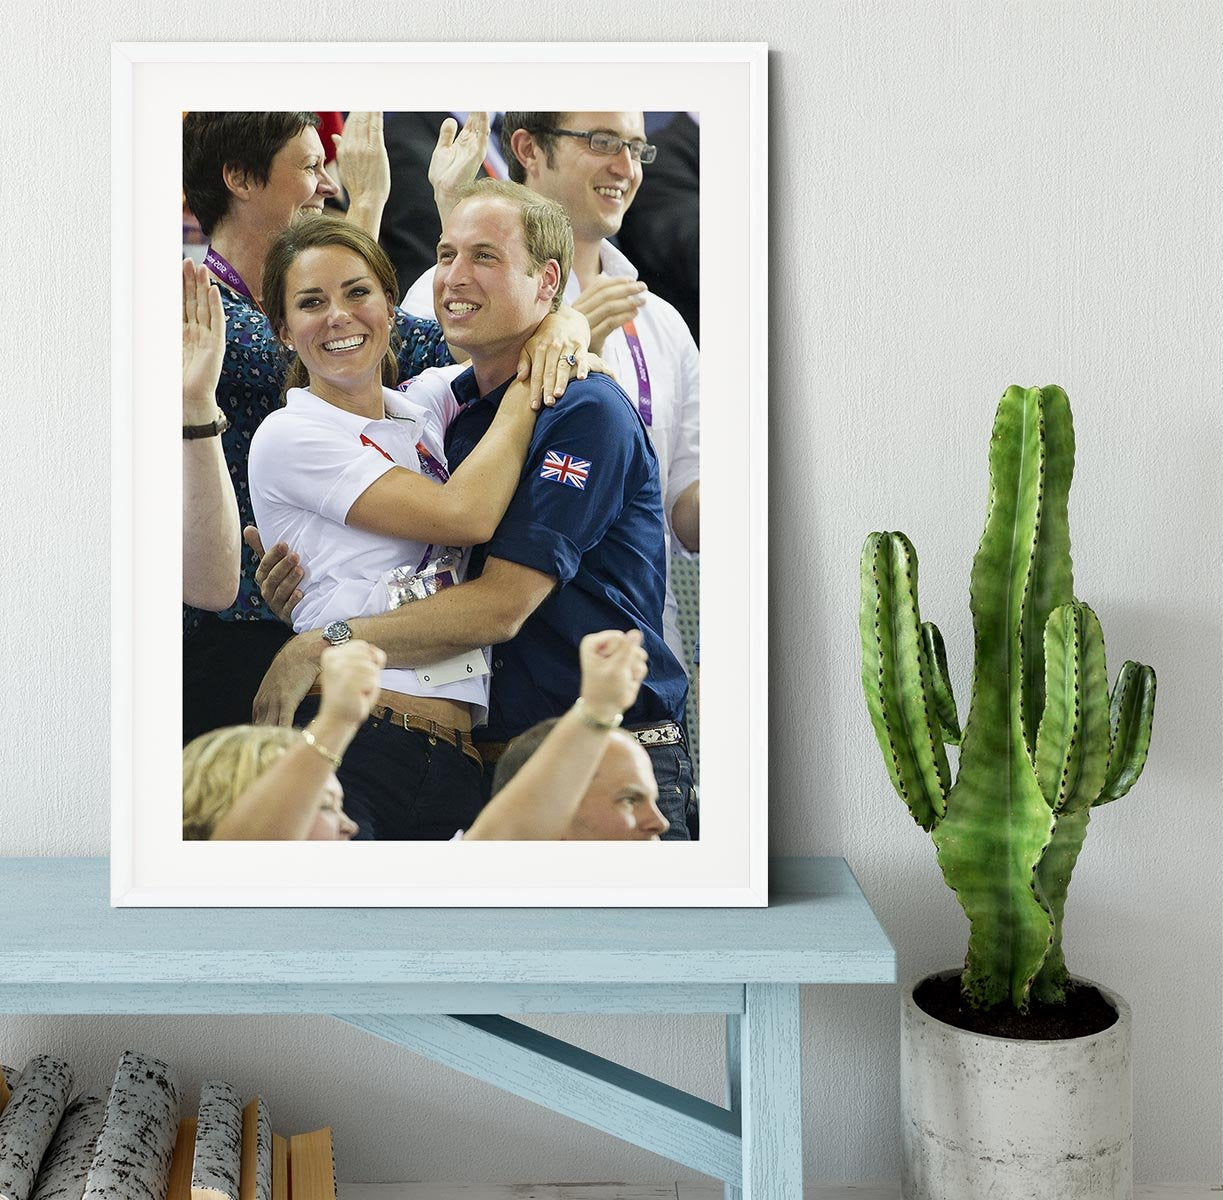 Prince William and Kate hugging at the 2012 Olympics Framed Print - Canvas Art Rocks - 5